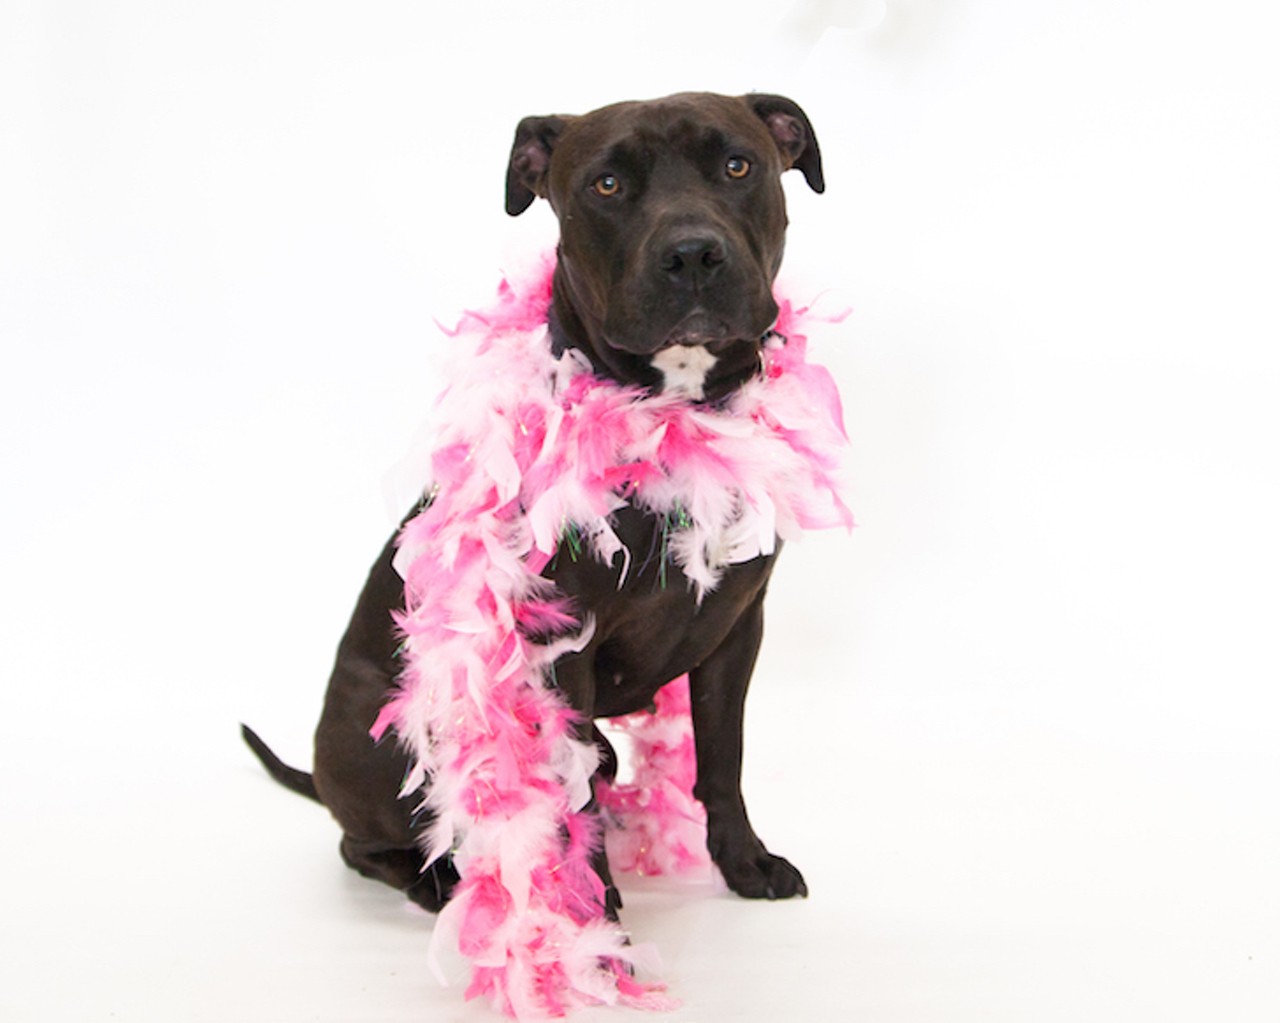 20 adoptable pups waiting to meet you at Orange County Animal Services